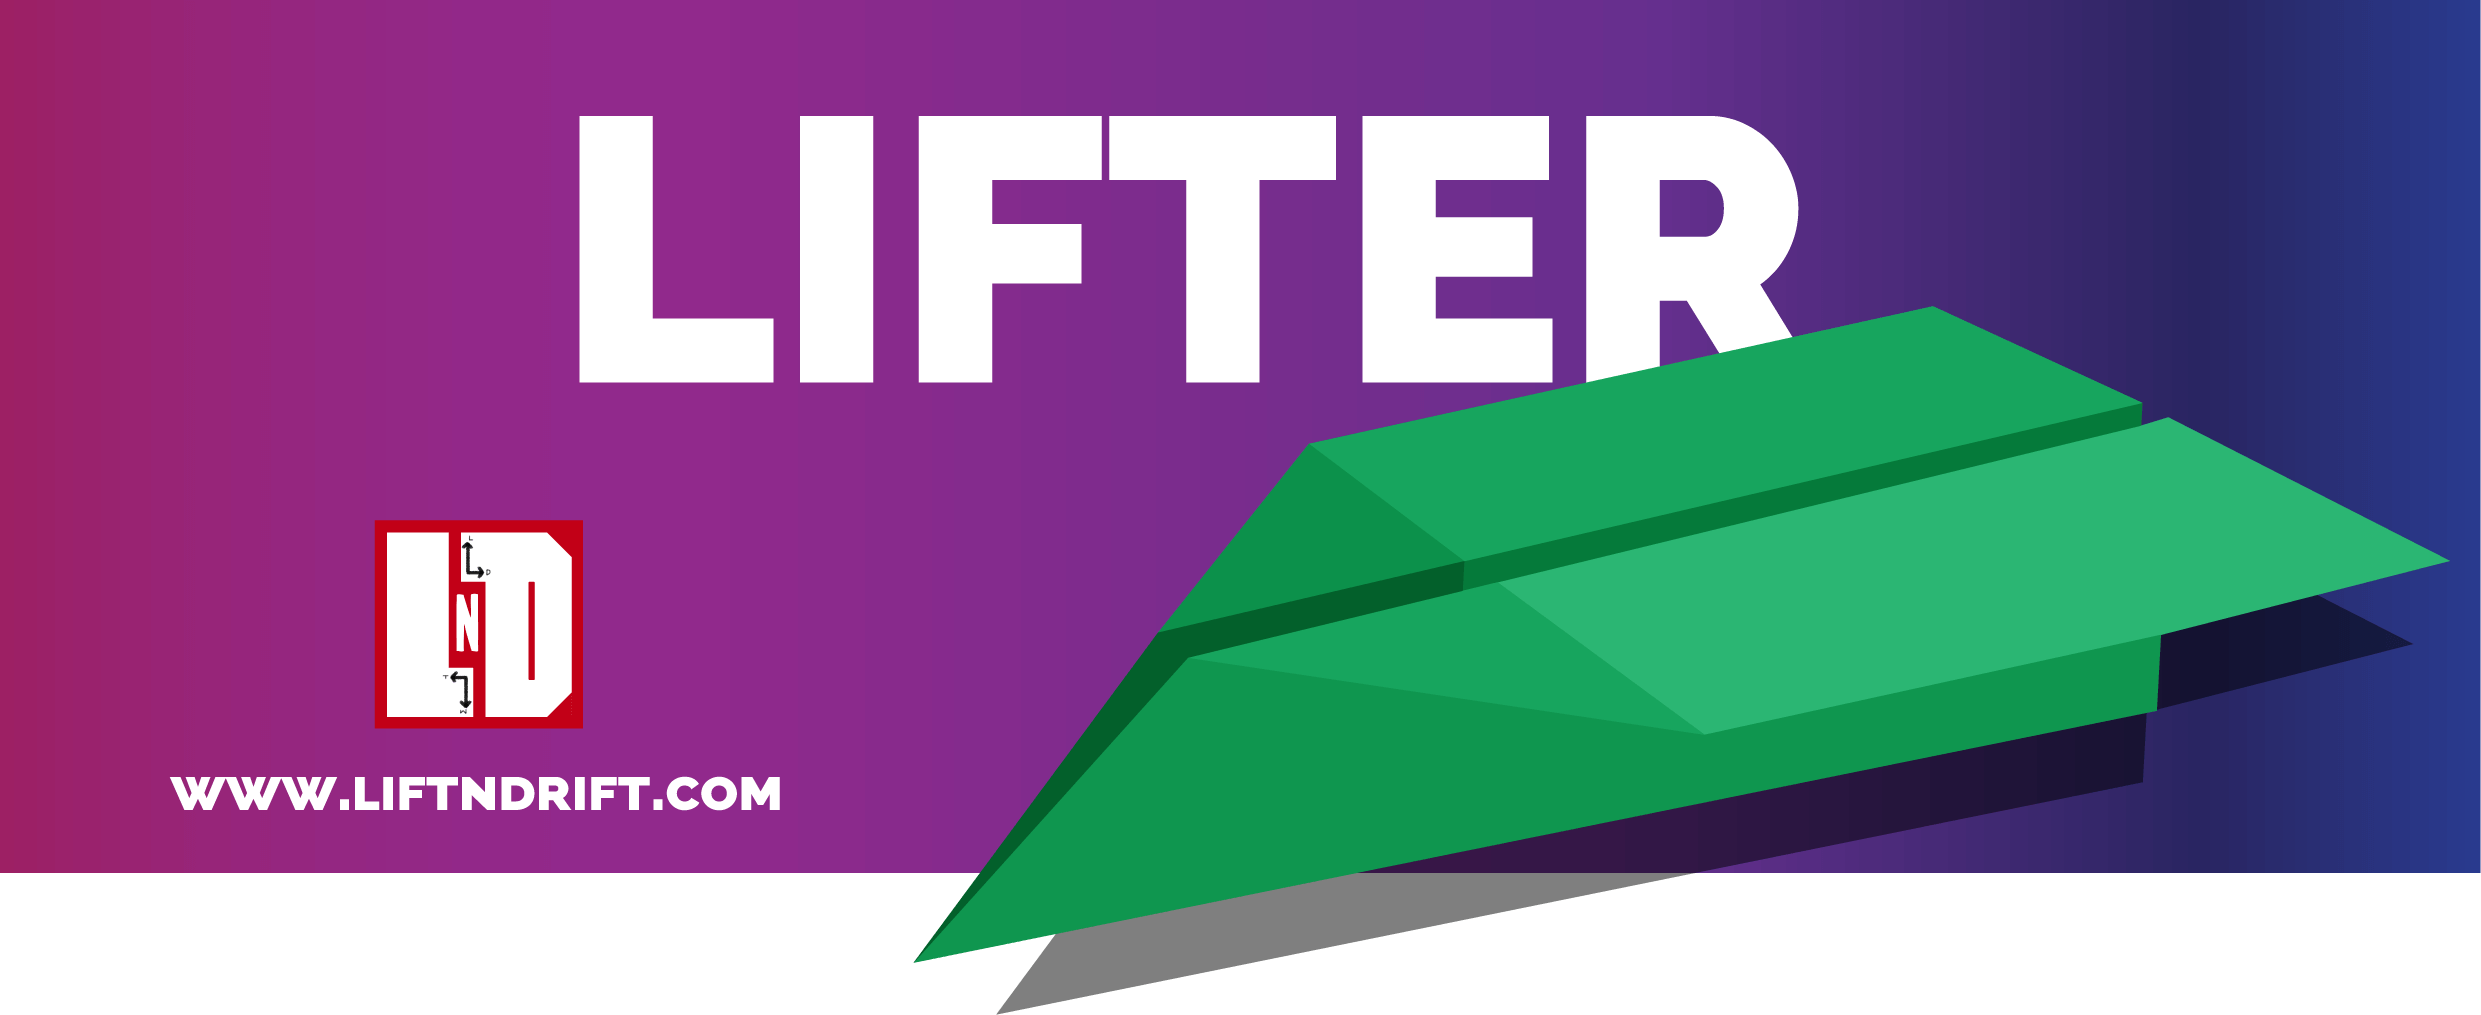 Lifter paper airplane